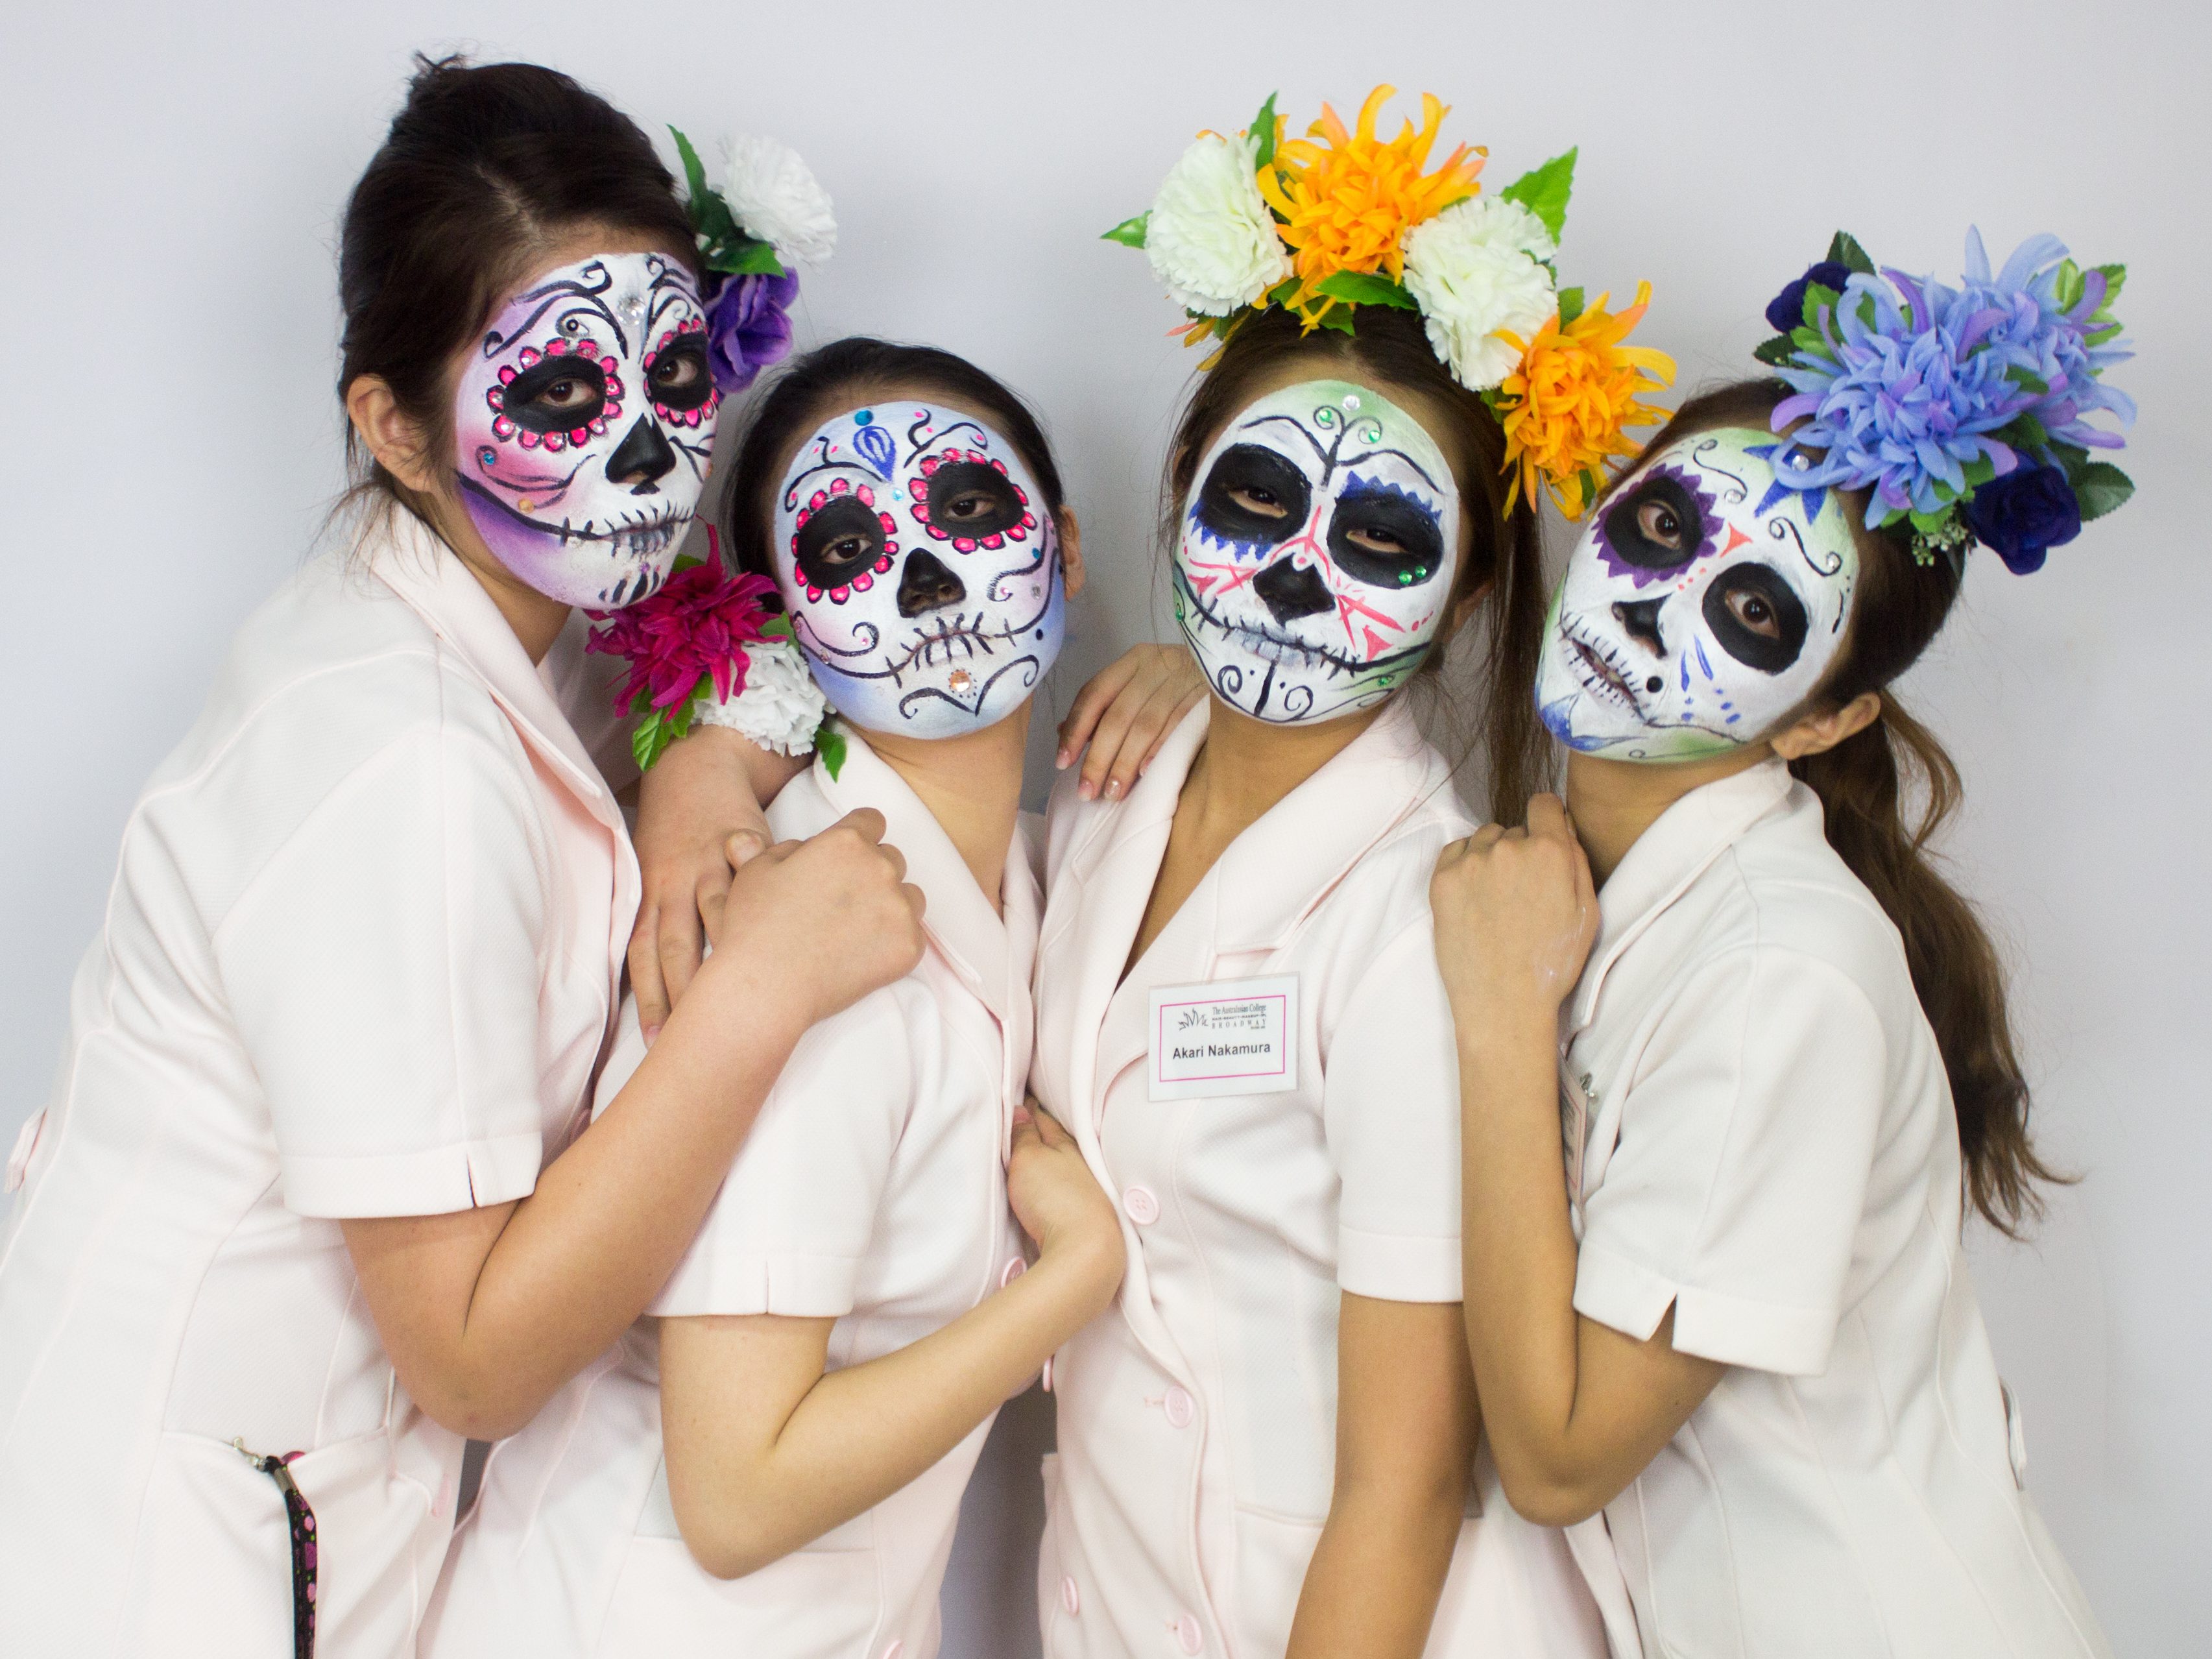 Australasian College Broadway hosts Japanese beauty students